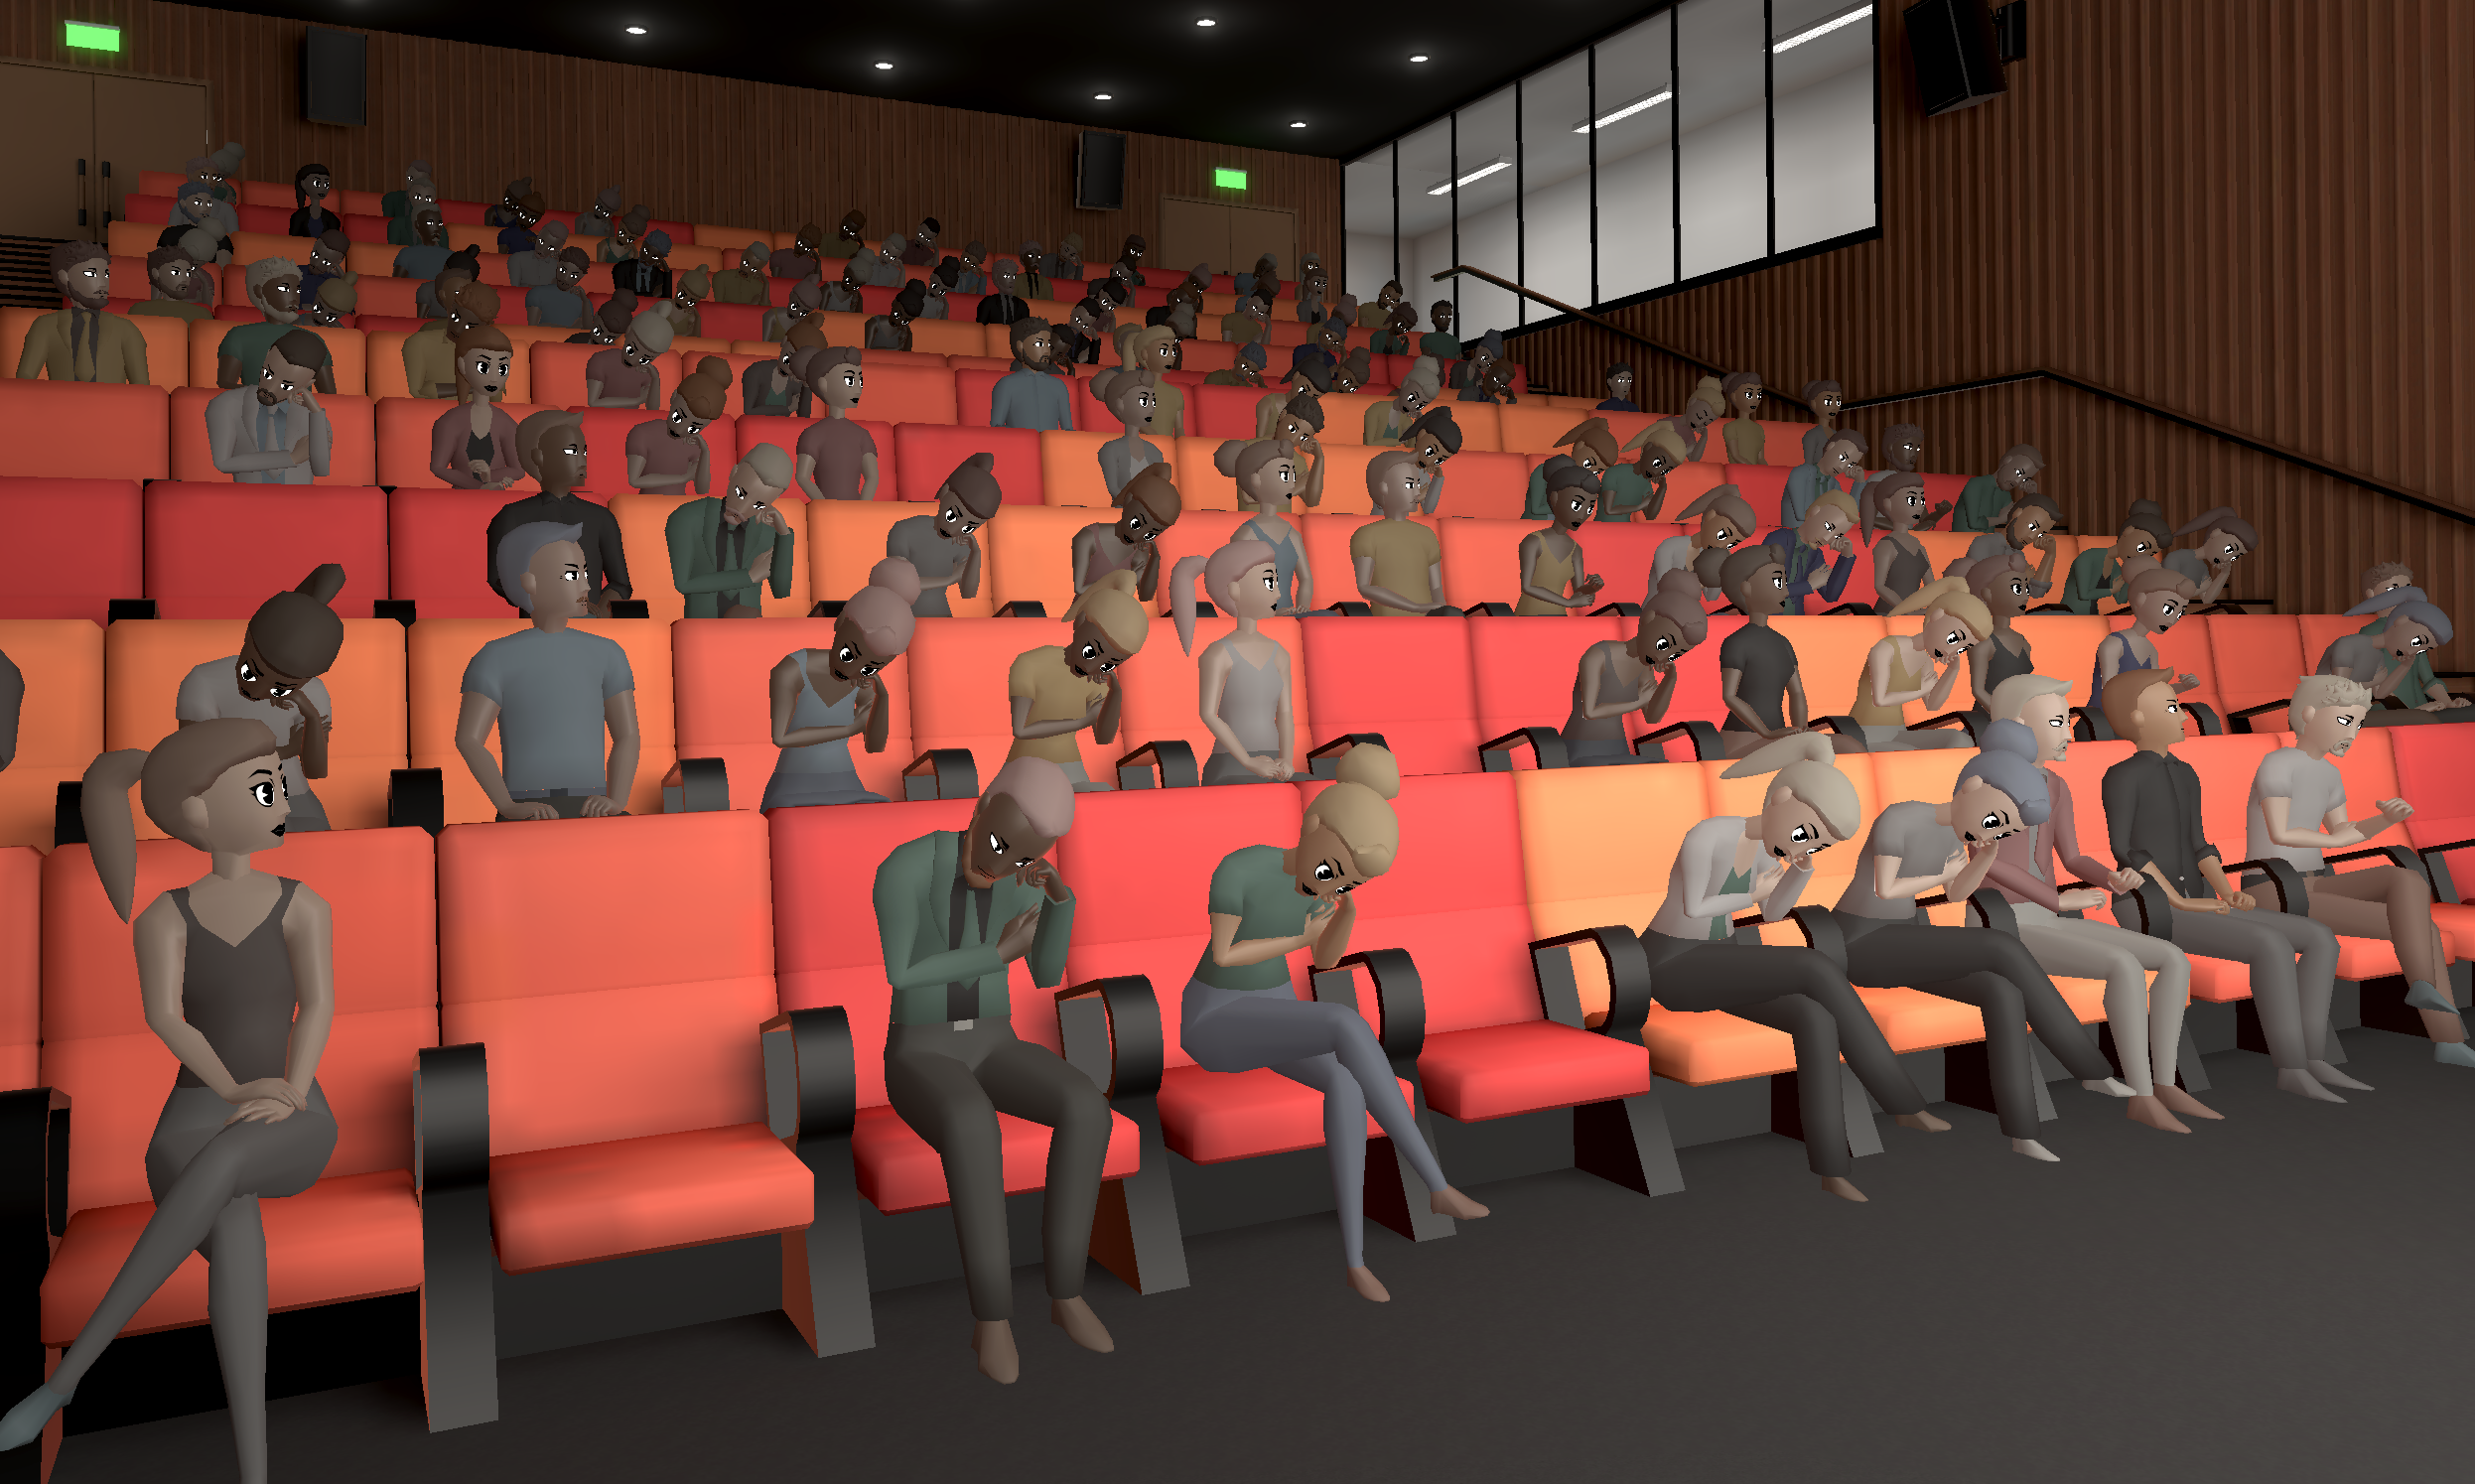 A screenshot of the audience in PedaXR - Presentation Simulation. The 3D avatar people are sitting on red couches and seem really bored.